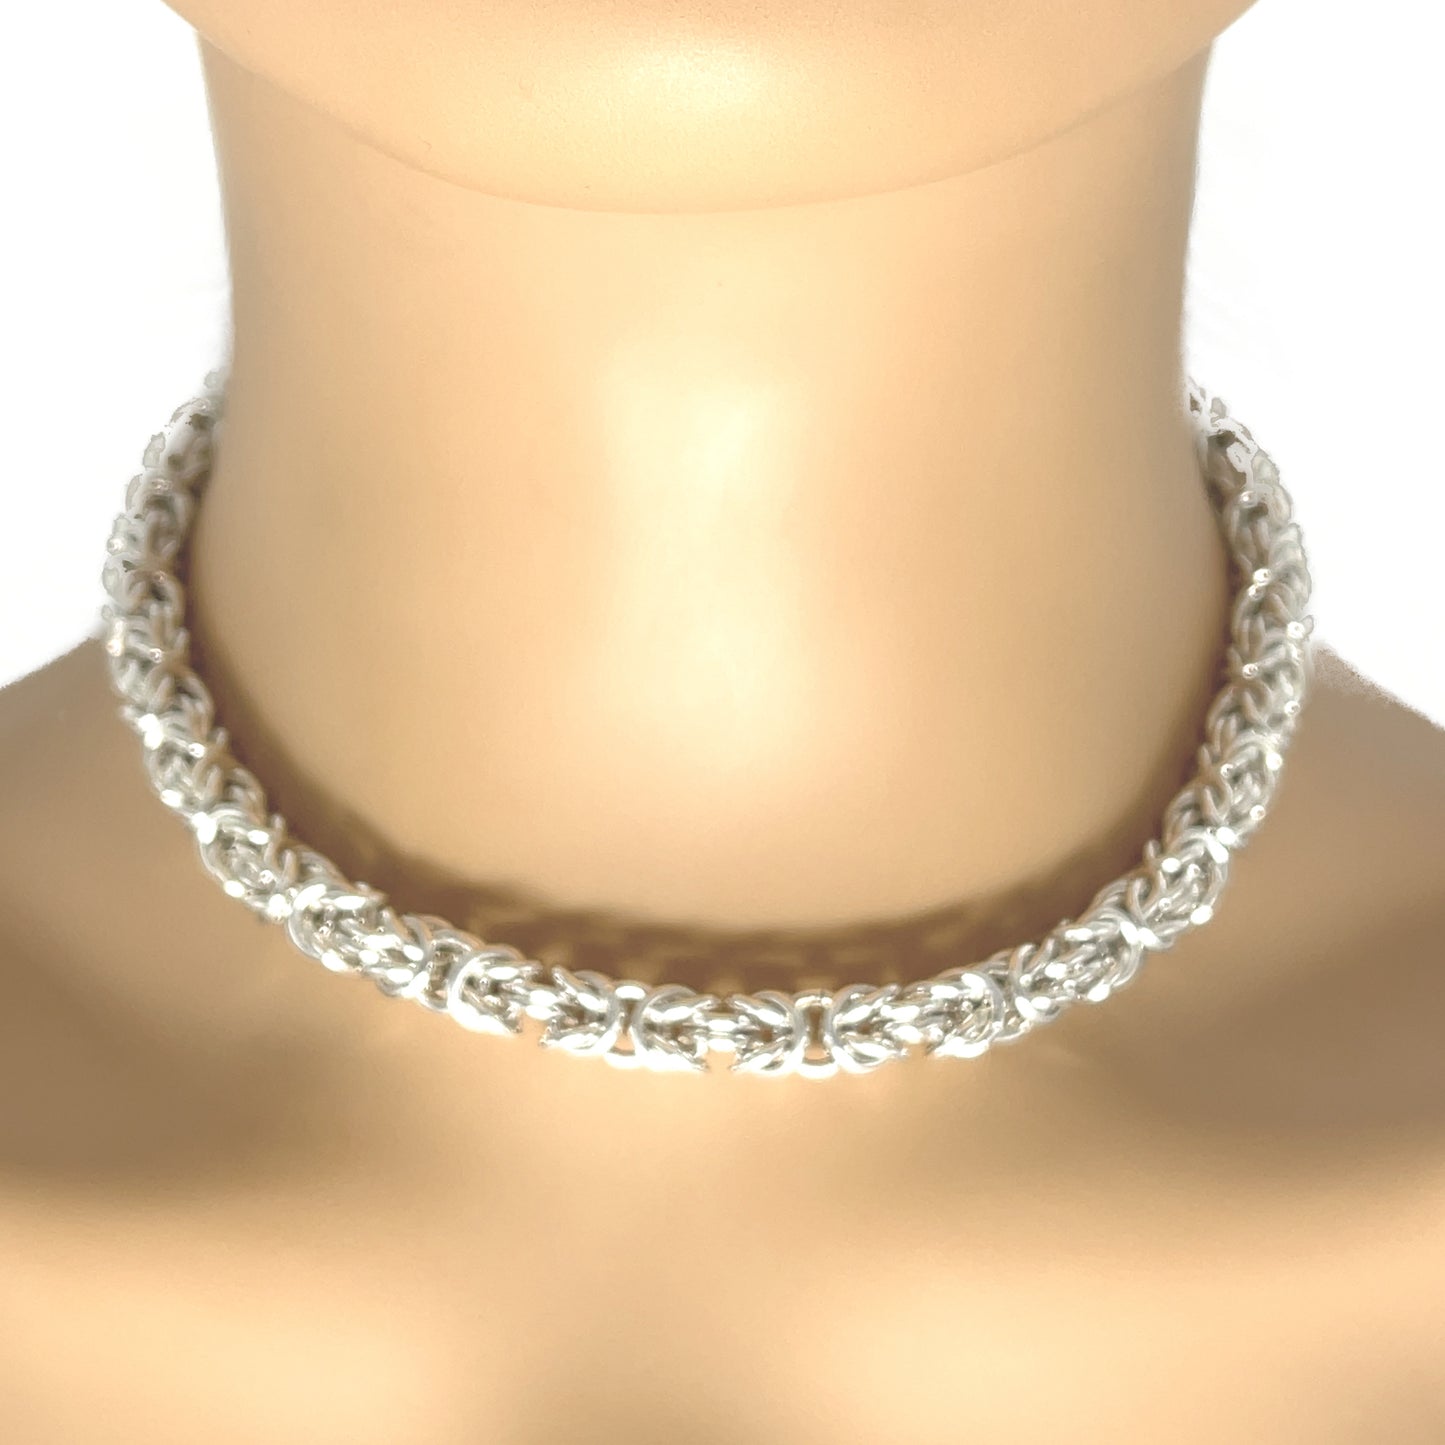 Tiffany and Co. Double Link Chain Necklace in Sterling Silver